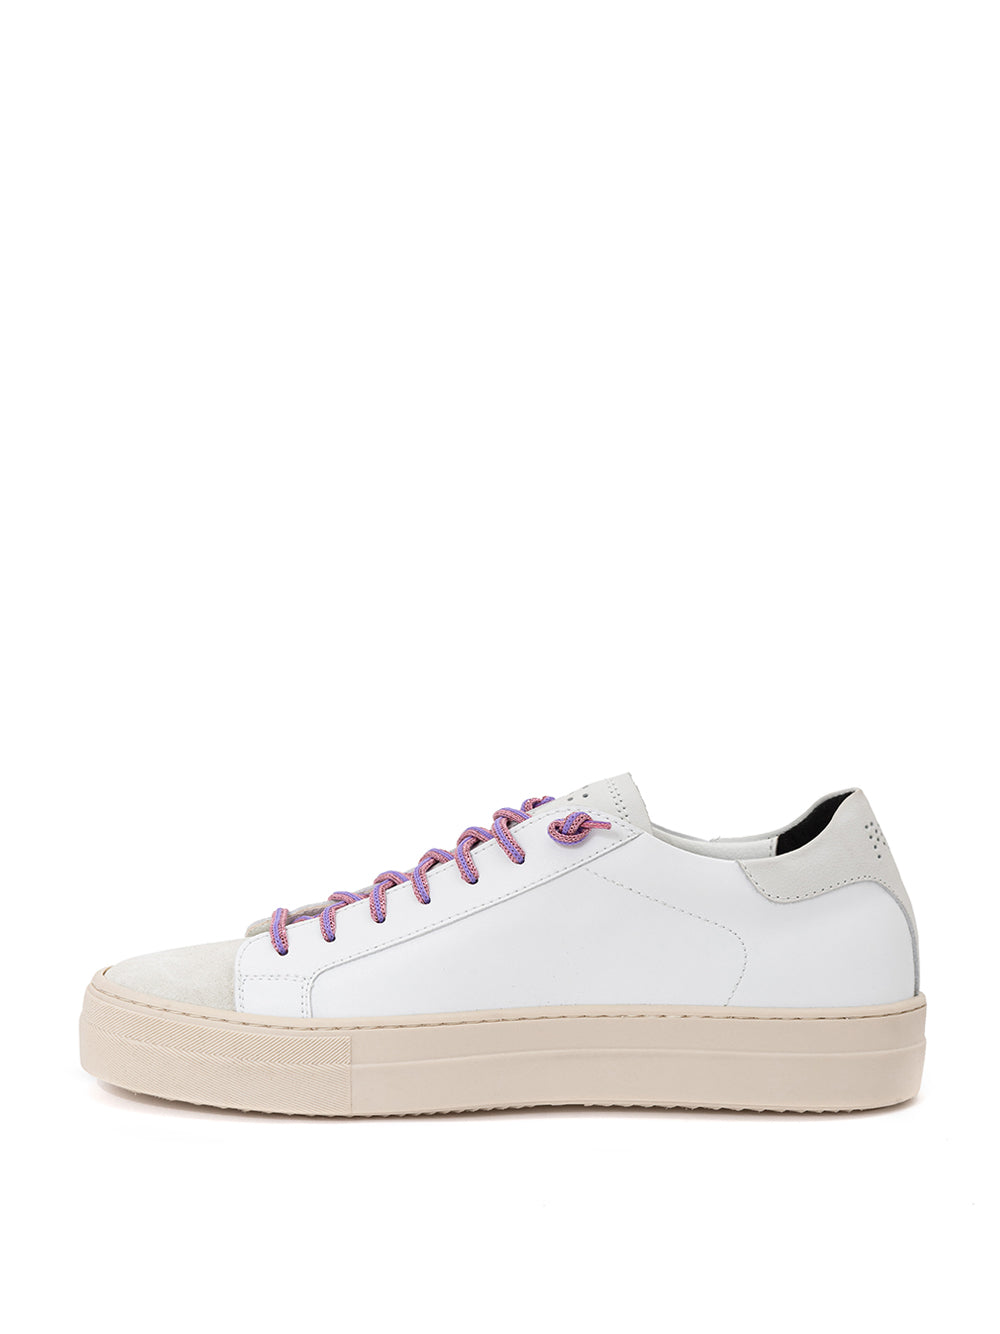 Thea sneaker in white leather P448